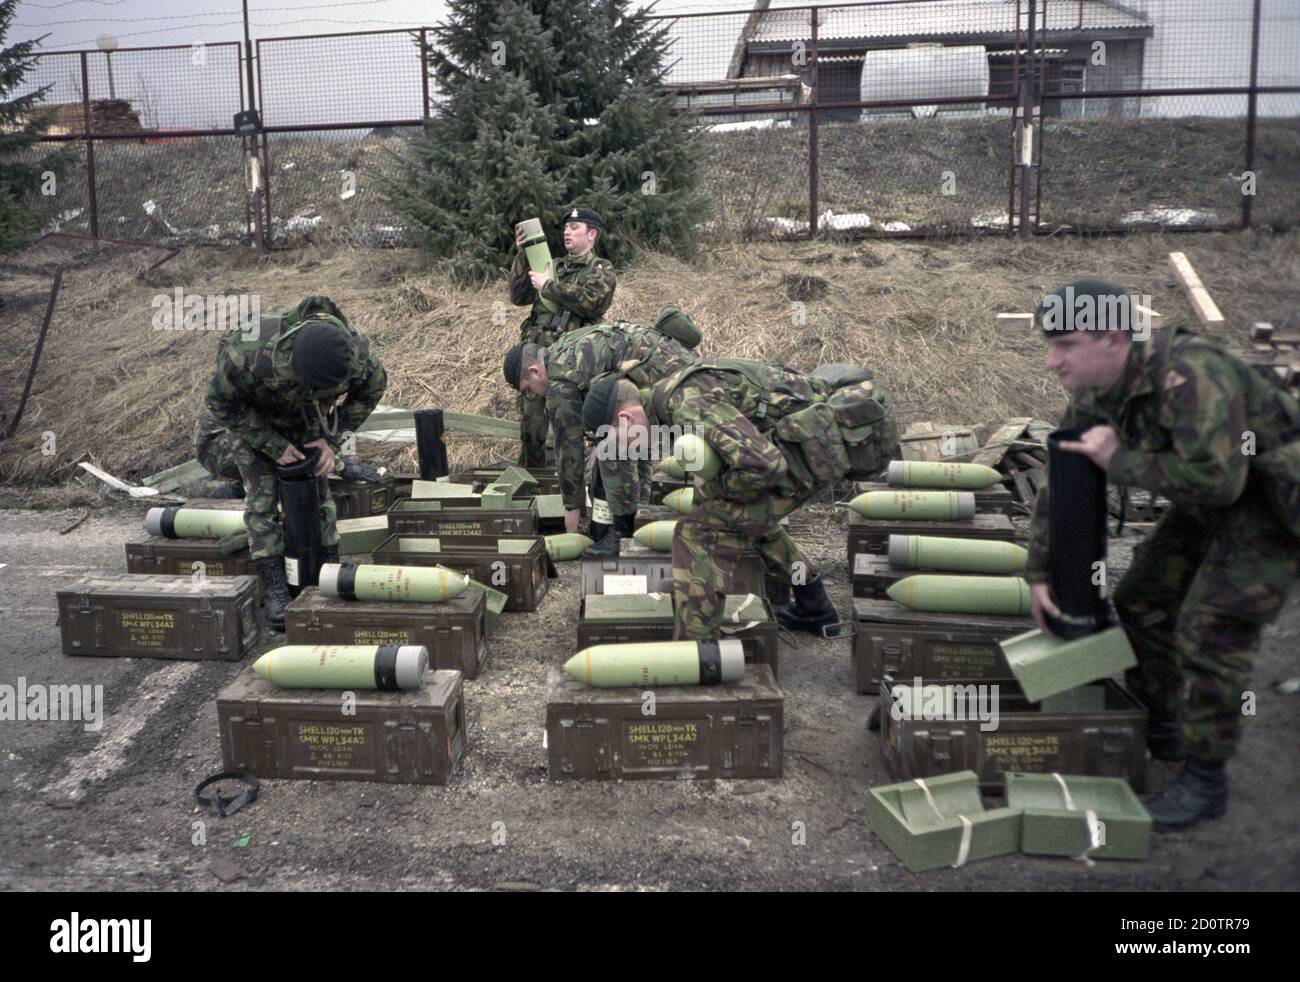 10th January 1996 During the war in Bosnia: British soldiers of the Queen’s Royal Hussars unpack 120mm smoke-bomb tank ammunition at their base in Kupres. Stock Photo